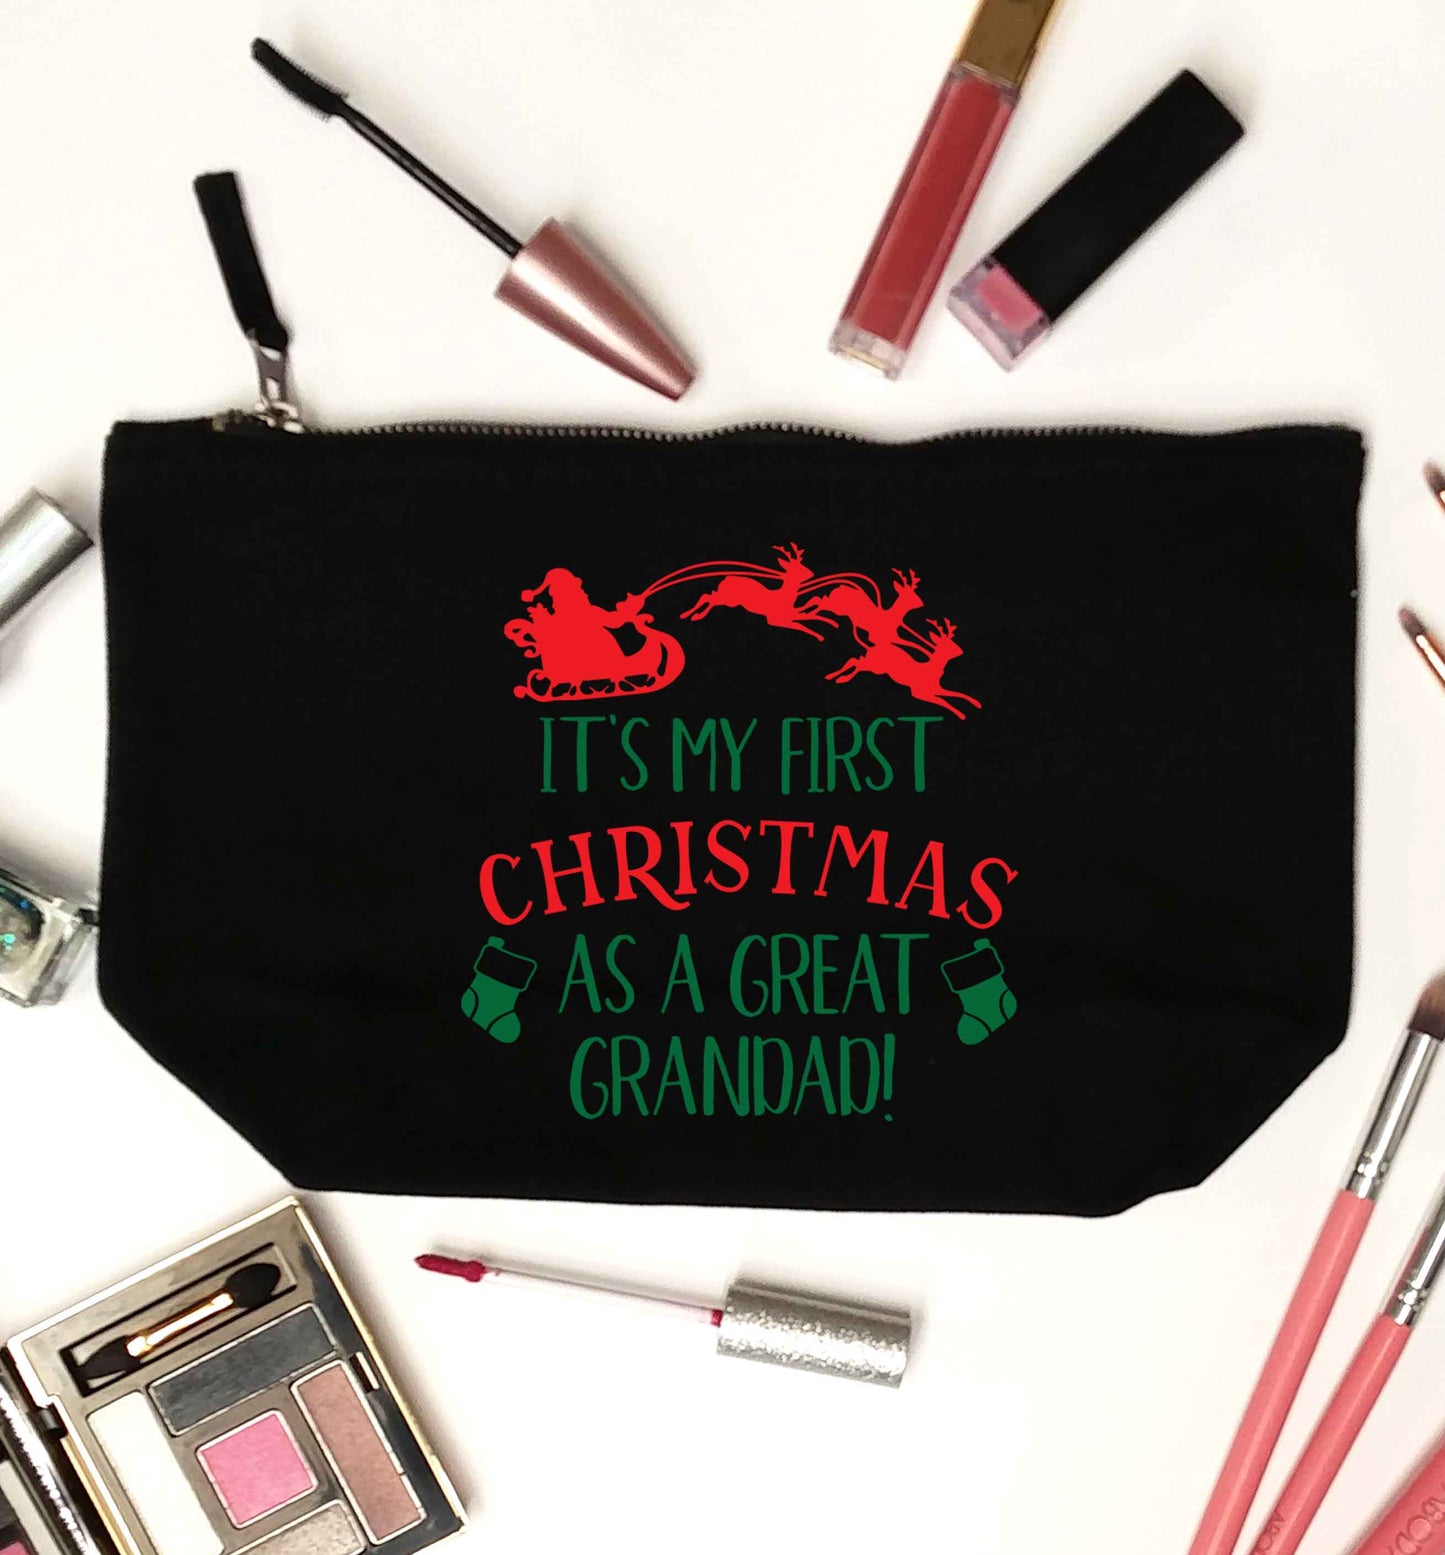 It's my first Christmas as a great grandad! black makeup bag